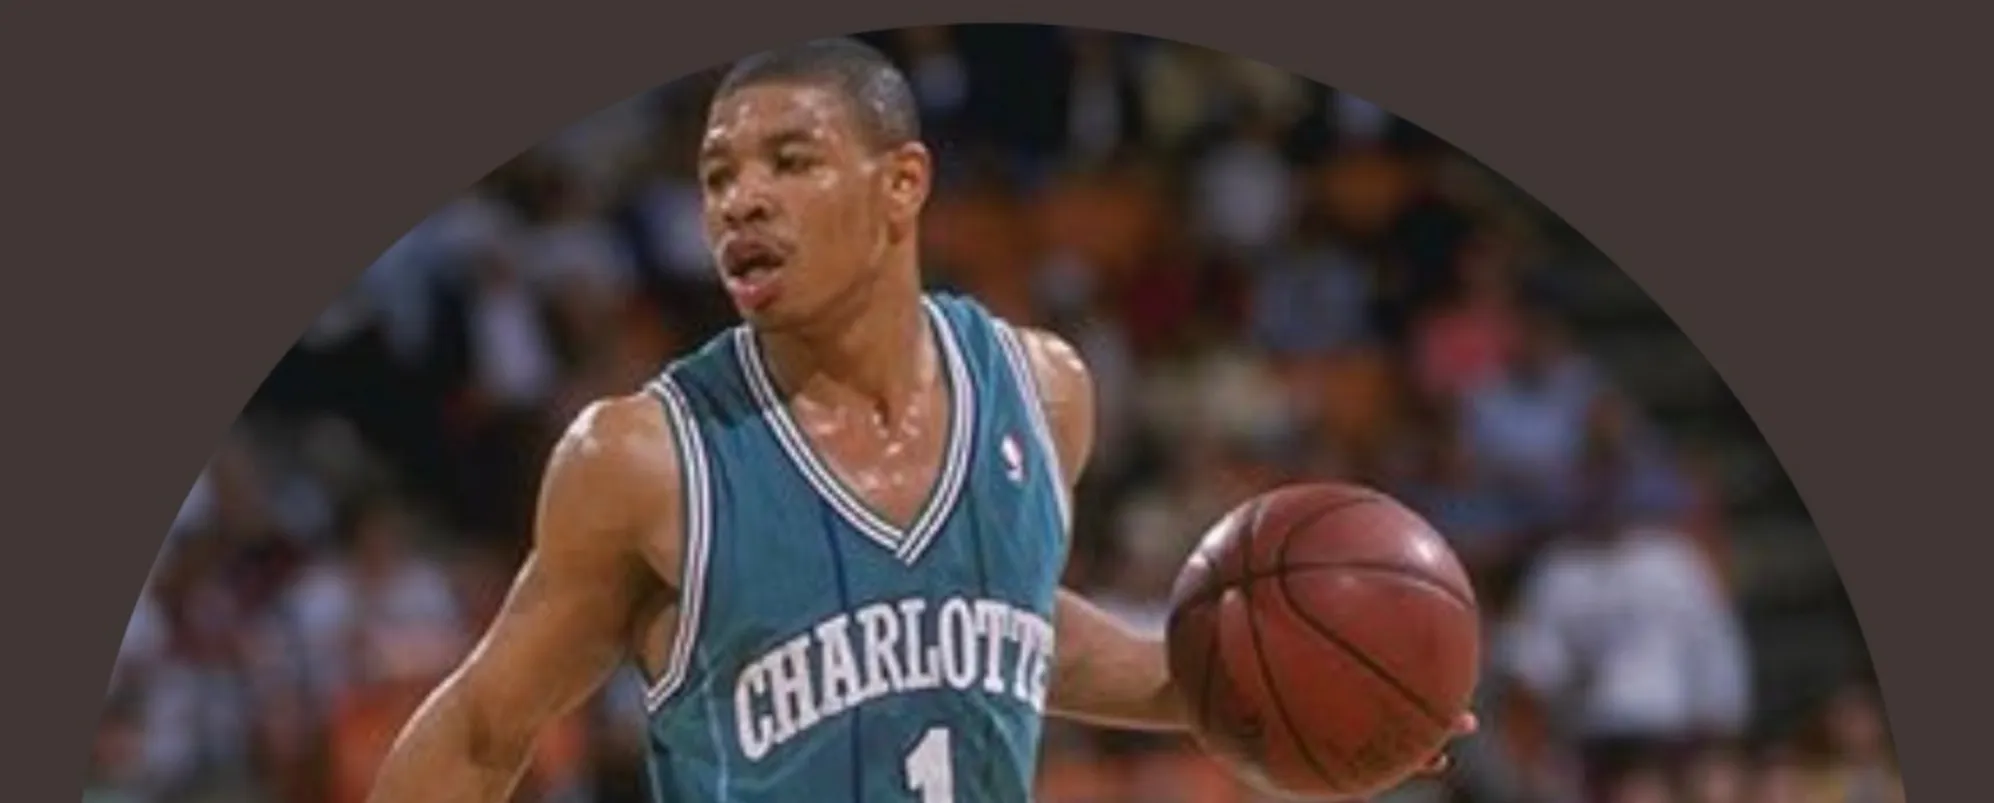 Former NBA Star Muggsy Bogues Reveals His Top 10 Most Inspirational Songs